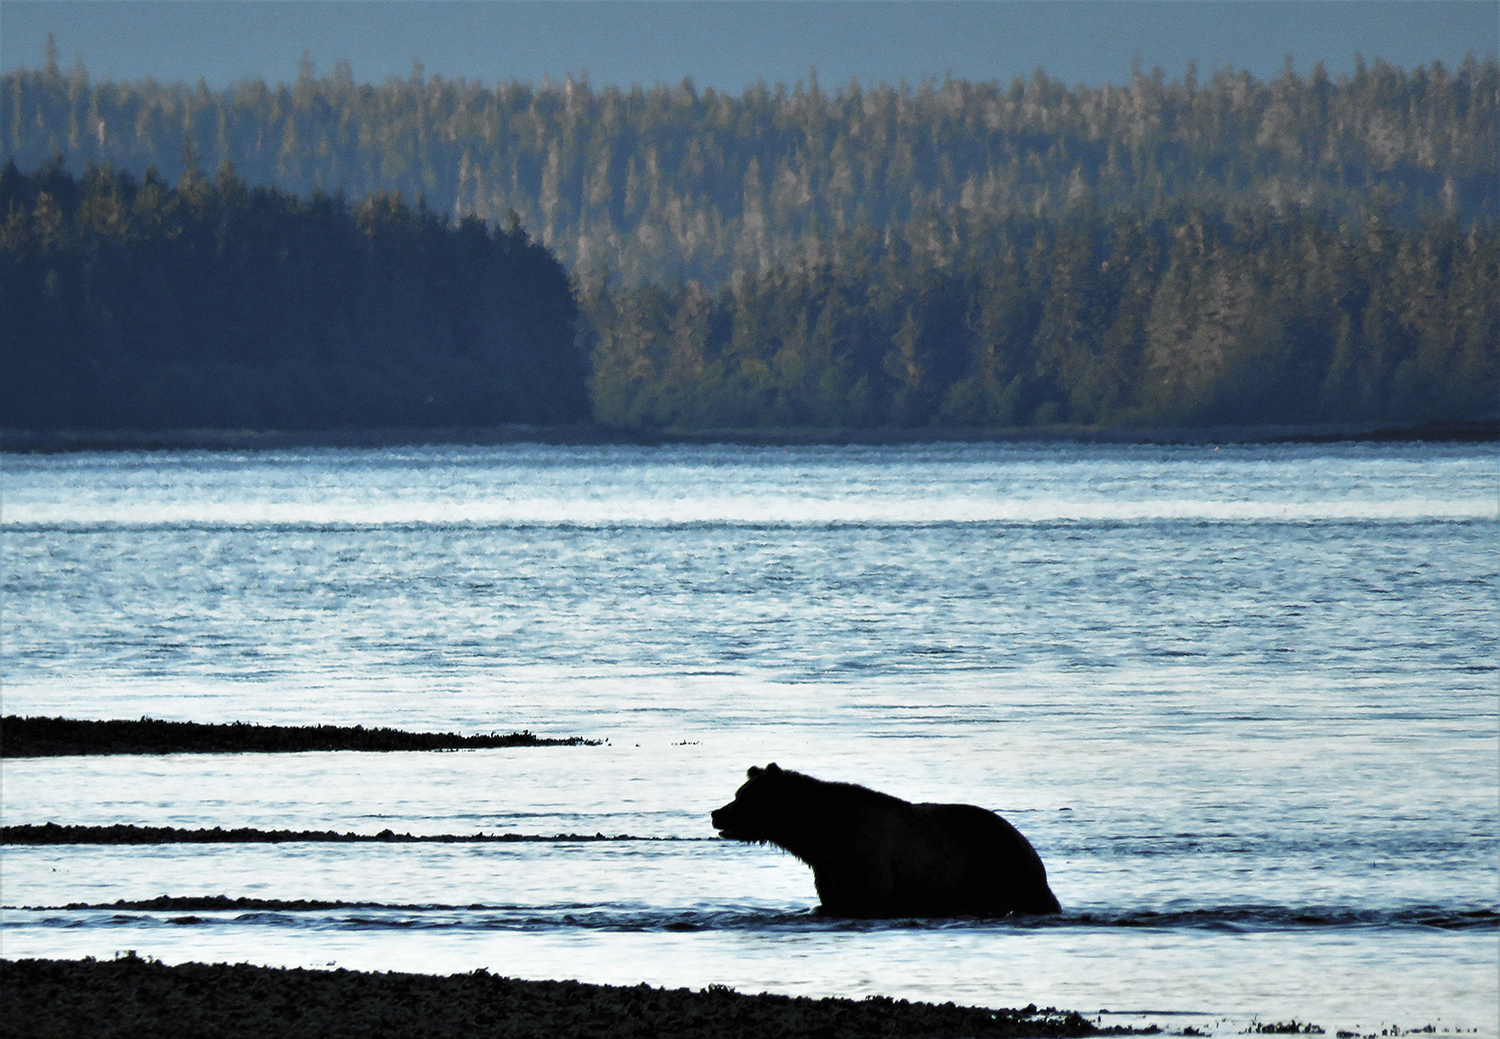 A large, male brown bear fishes for salmon in the Tongass National Forest.